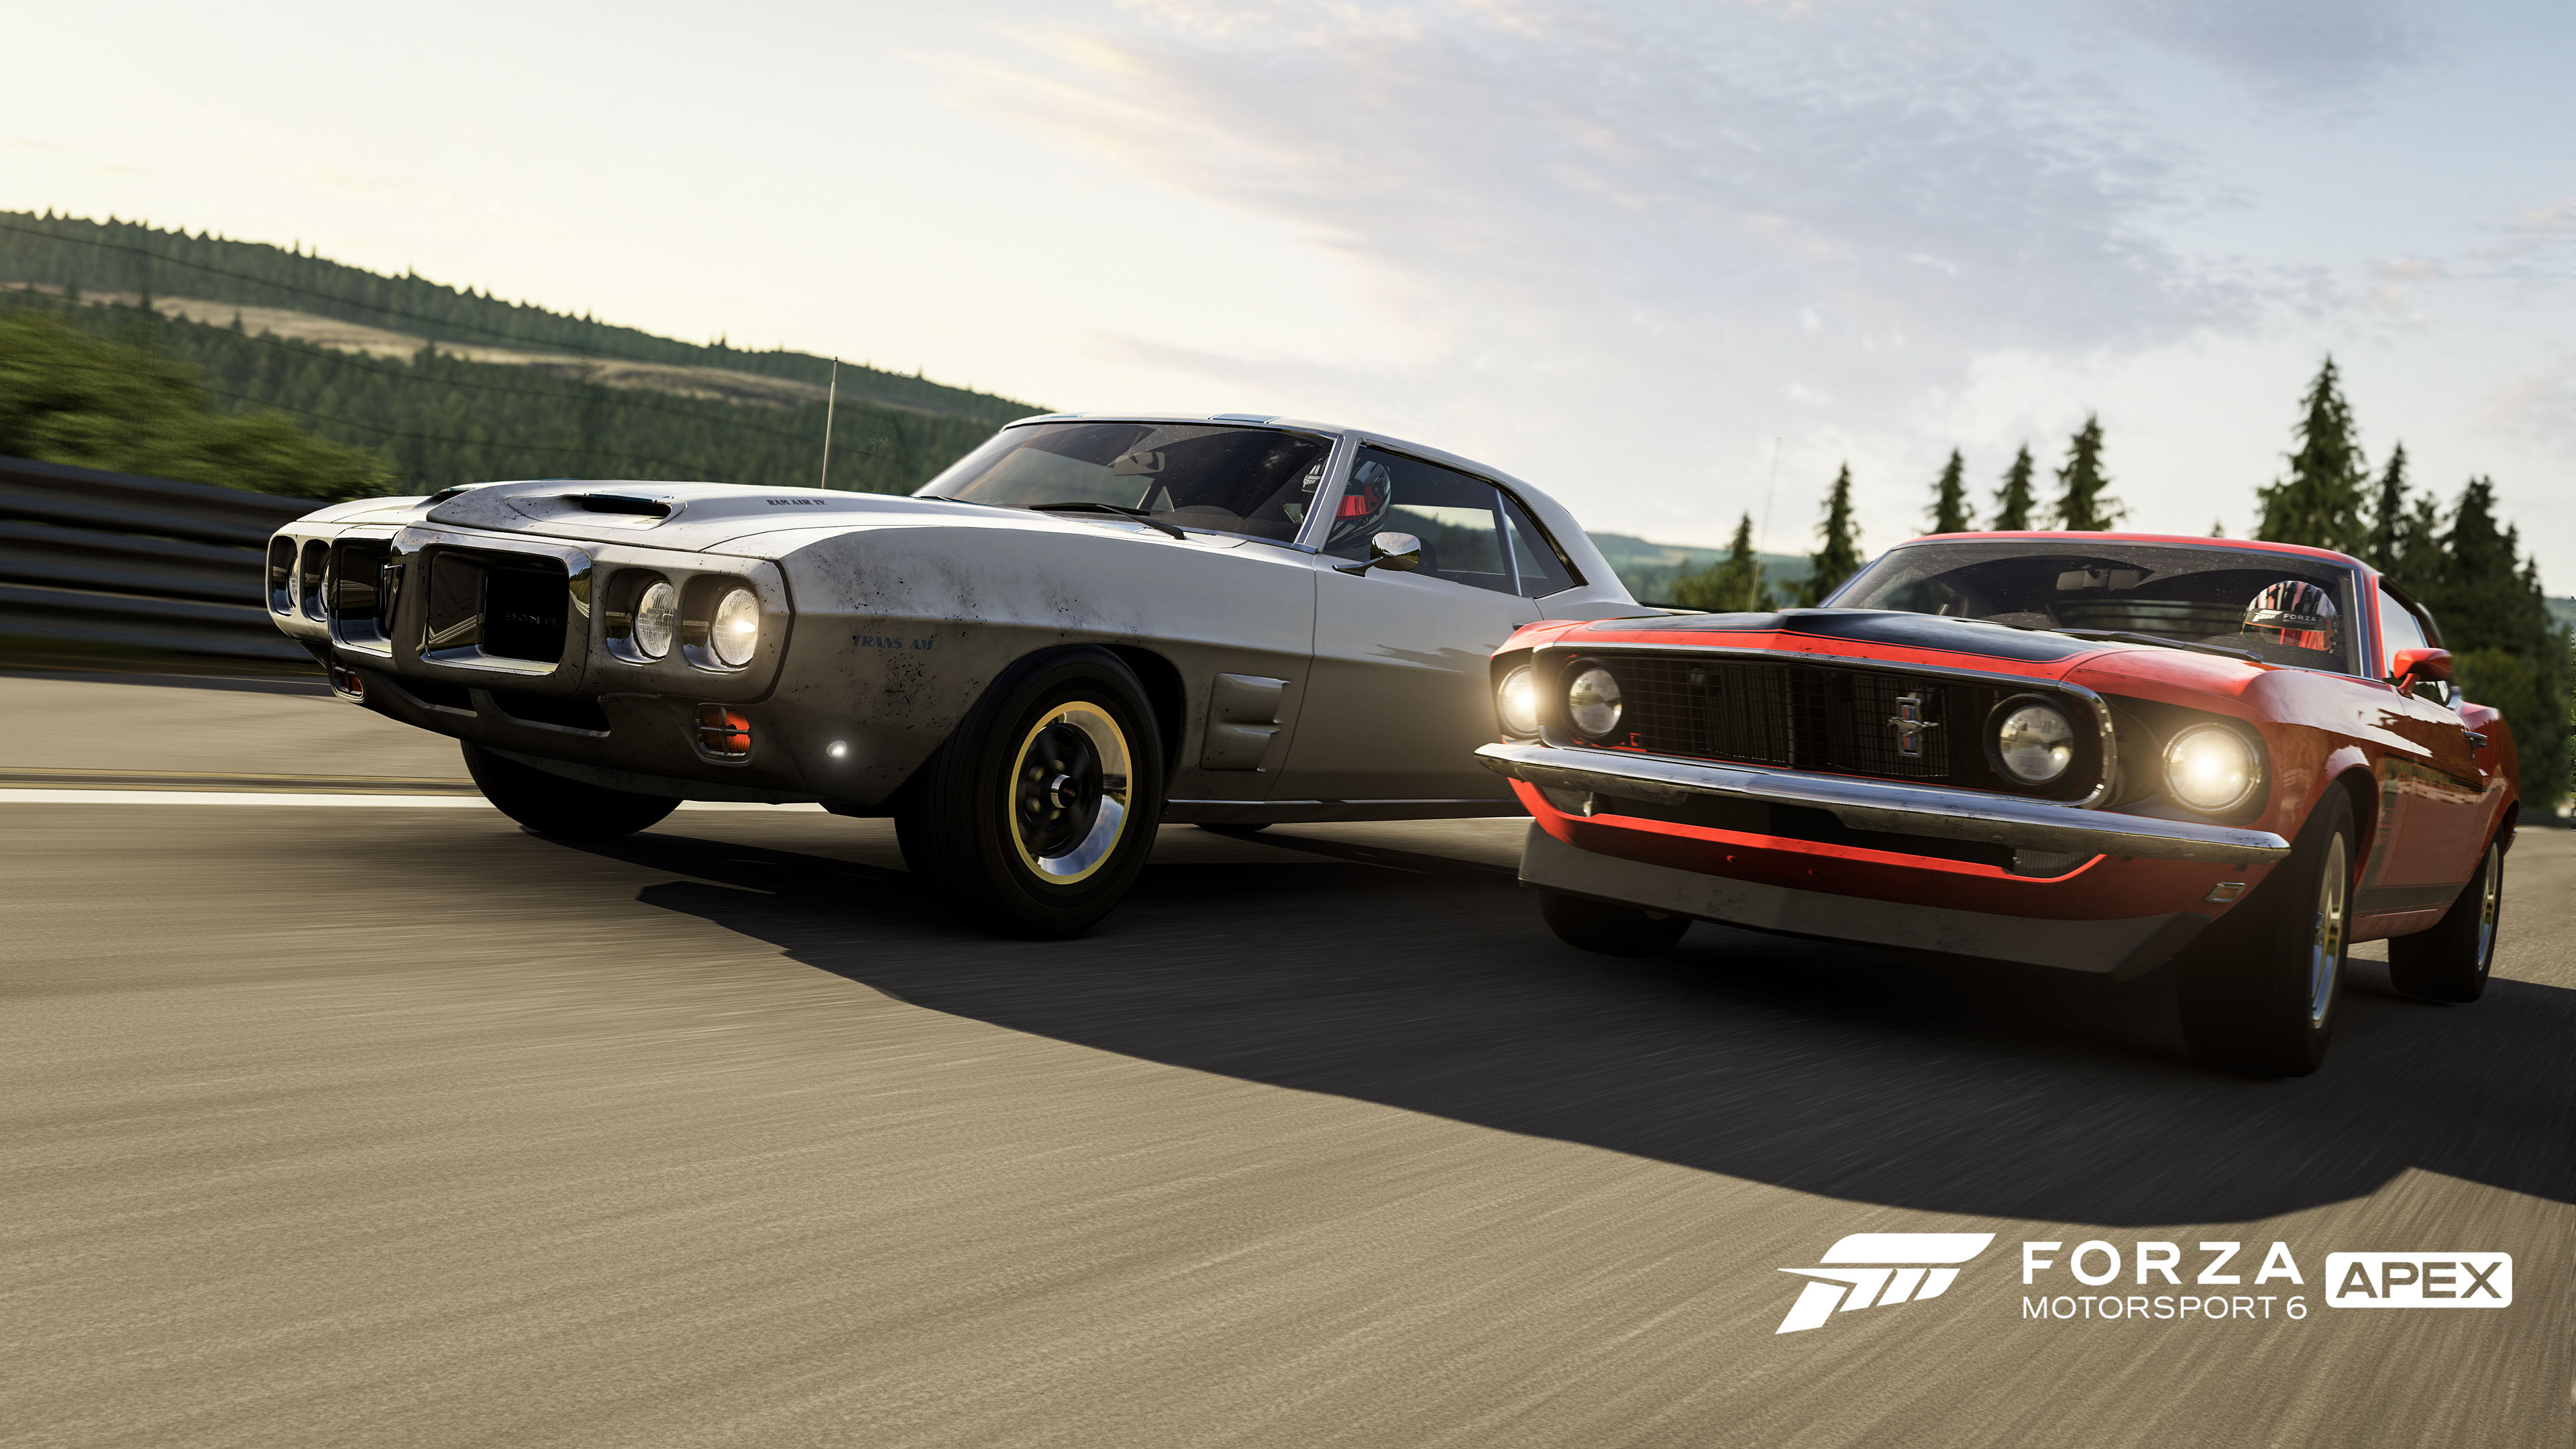 Amazing Forza Motorsport 6: Apex Pictures & Backgrounds